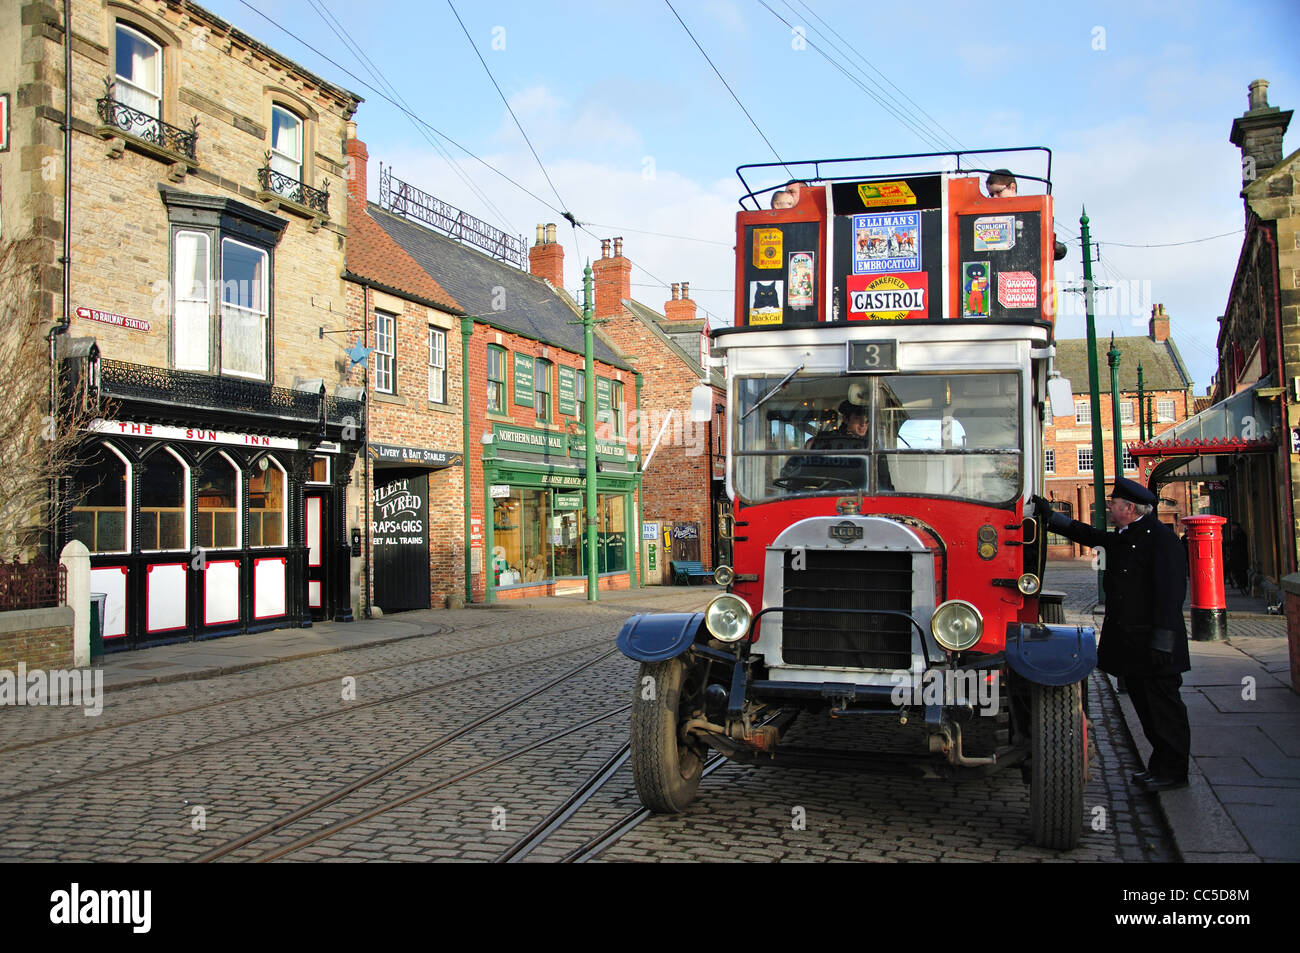 https://c8.alamy.com/comp/CC5D8M/edwardian-town-in-beamish-the-north-of-england-open-air-museum-near-CC5D8M.jpg